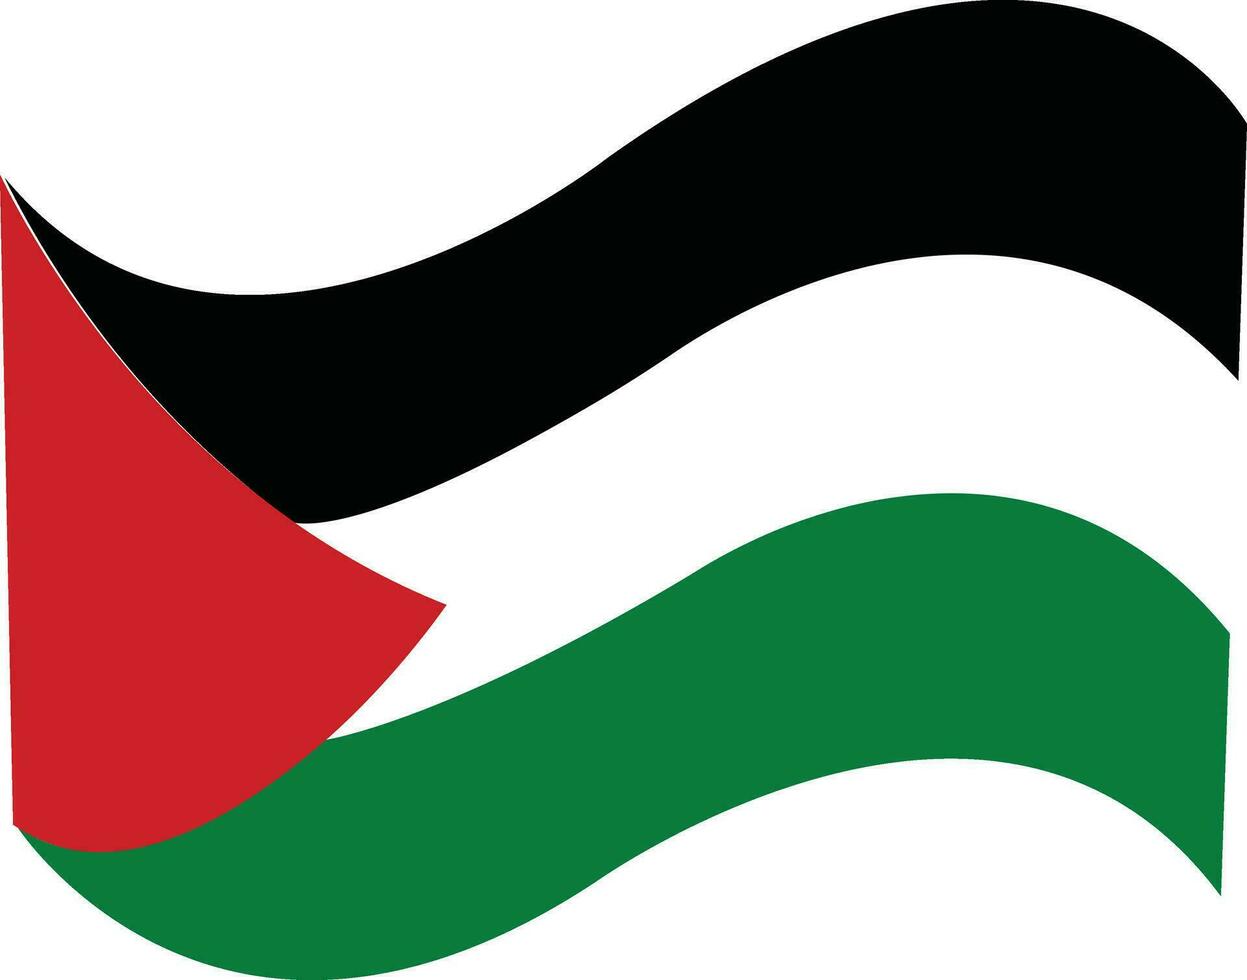 Free Palestine flag icon in flat. isolated on transparent background. use for banner, t-shirt, social media post as stand with Palestine freedom flag sign symbol vector for apps and website